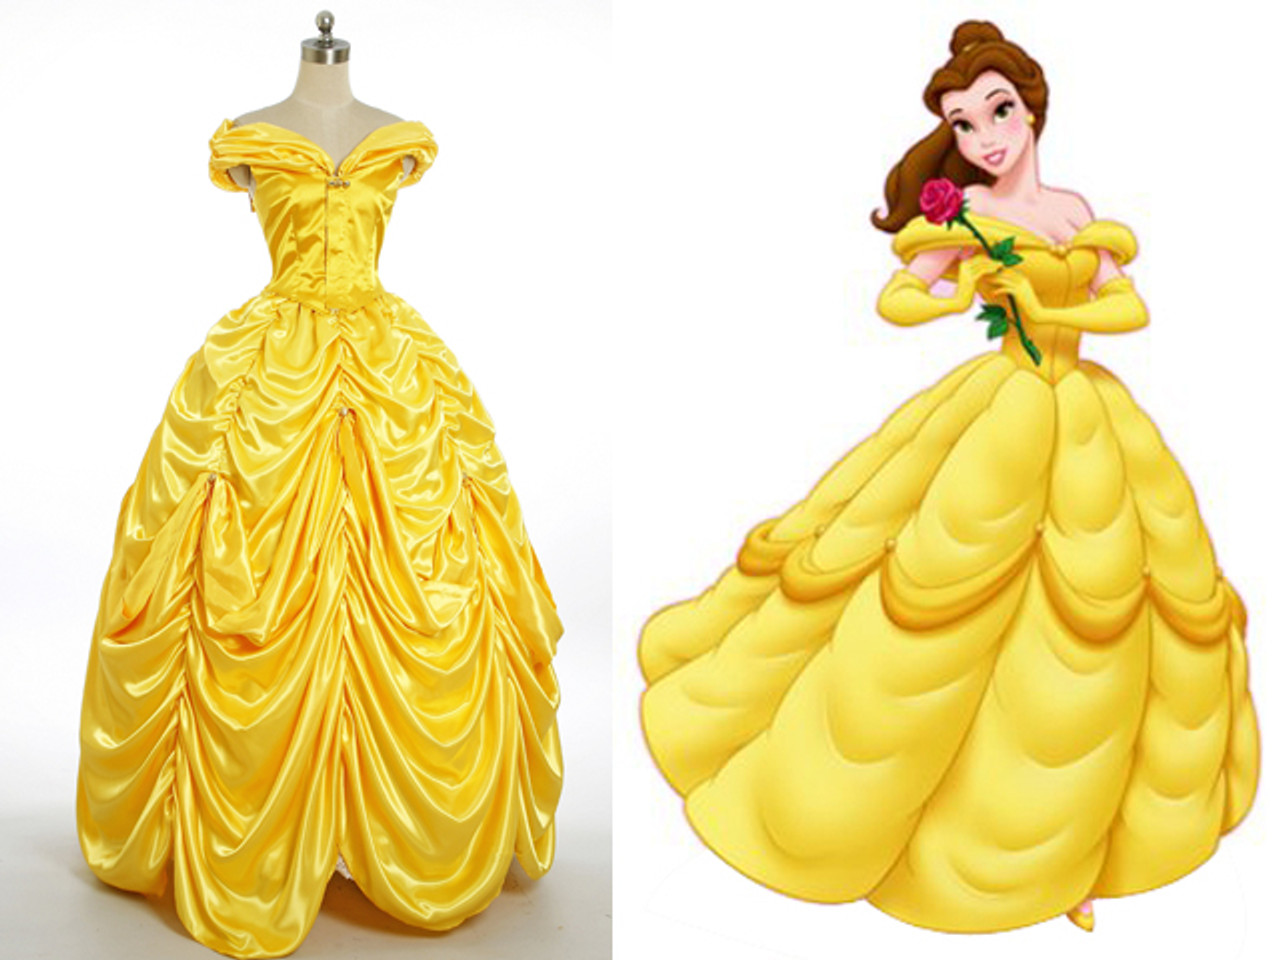 Disney Beauty And The Beast Cosplay Belle Costume Yellow Ball Gown Civil War